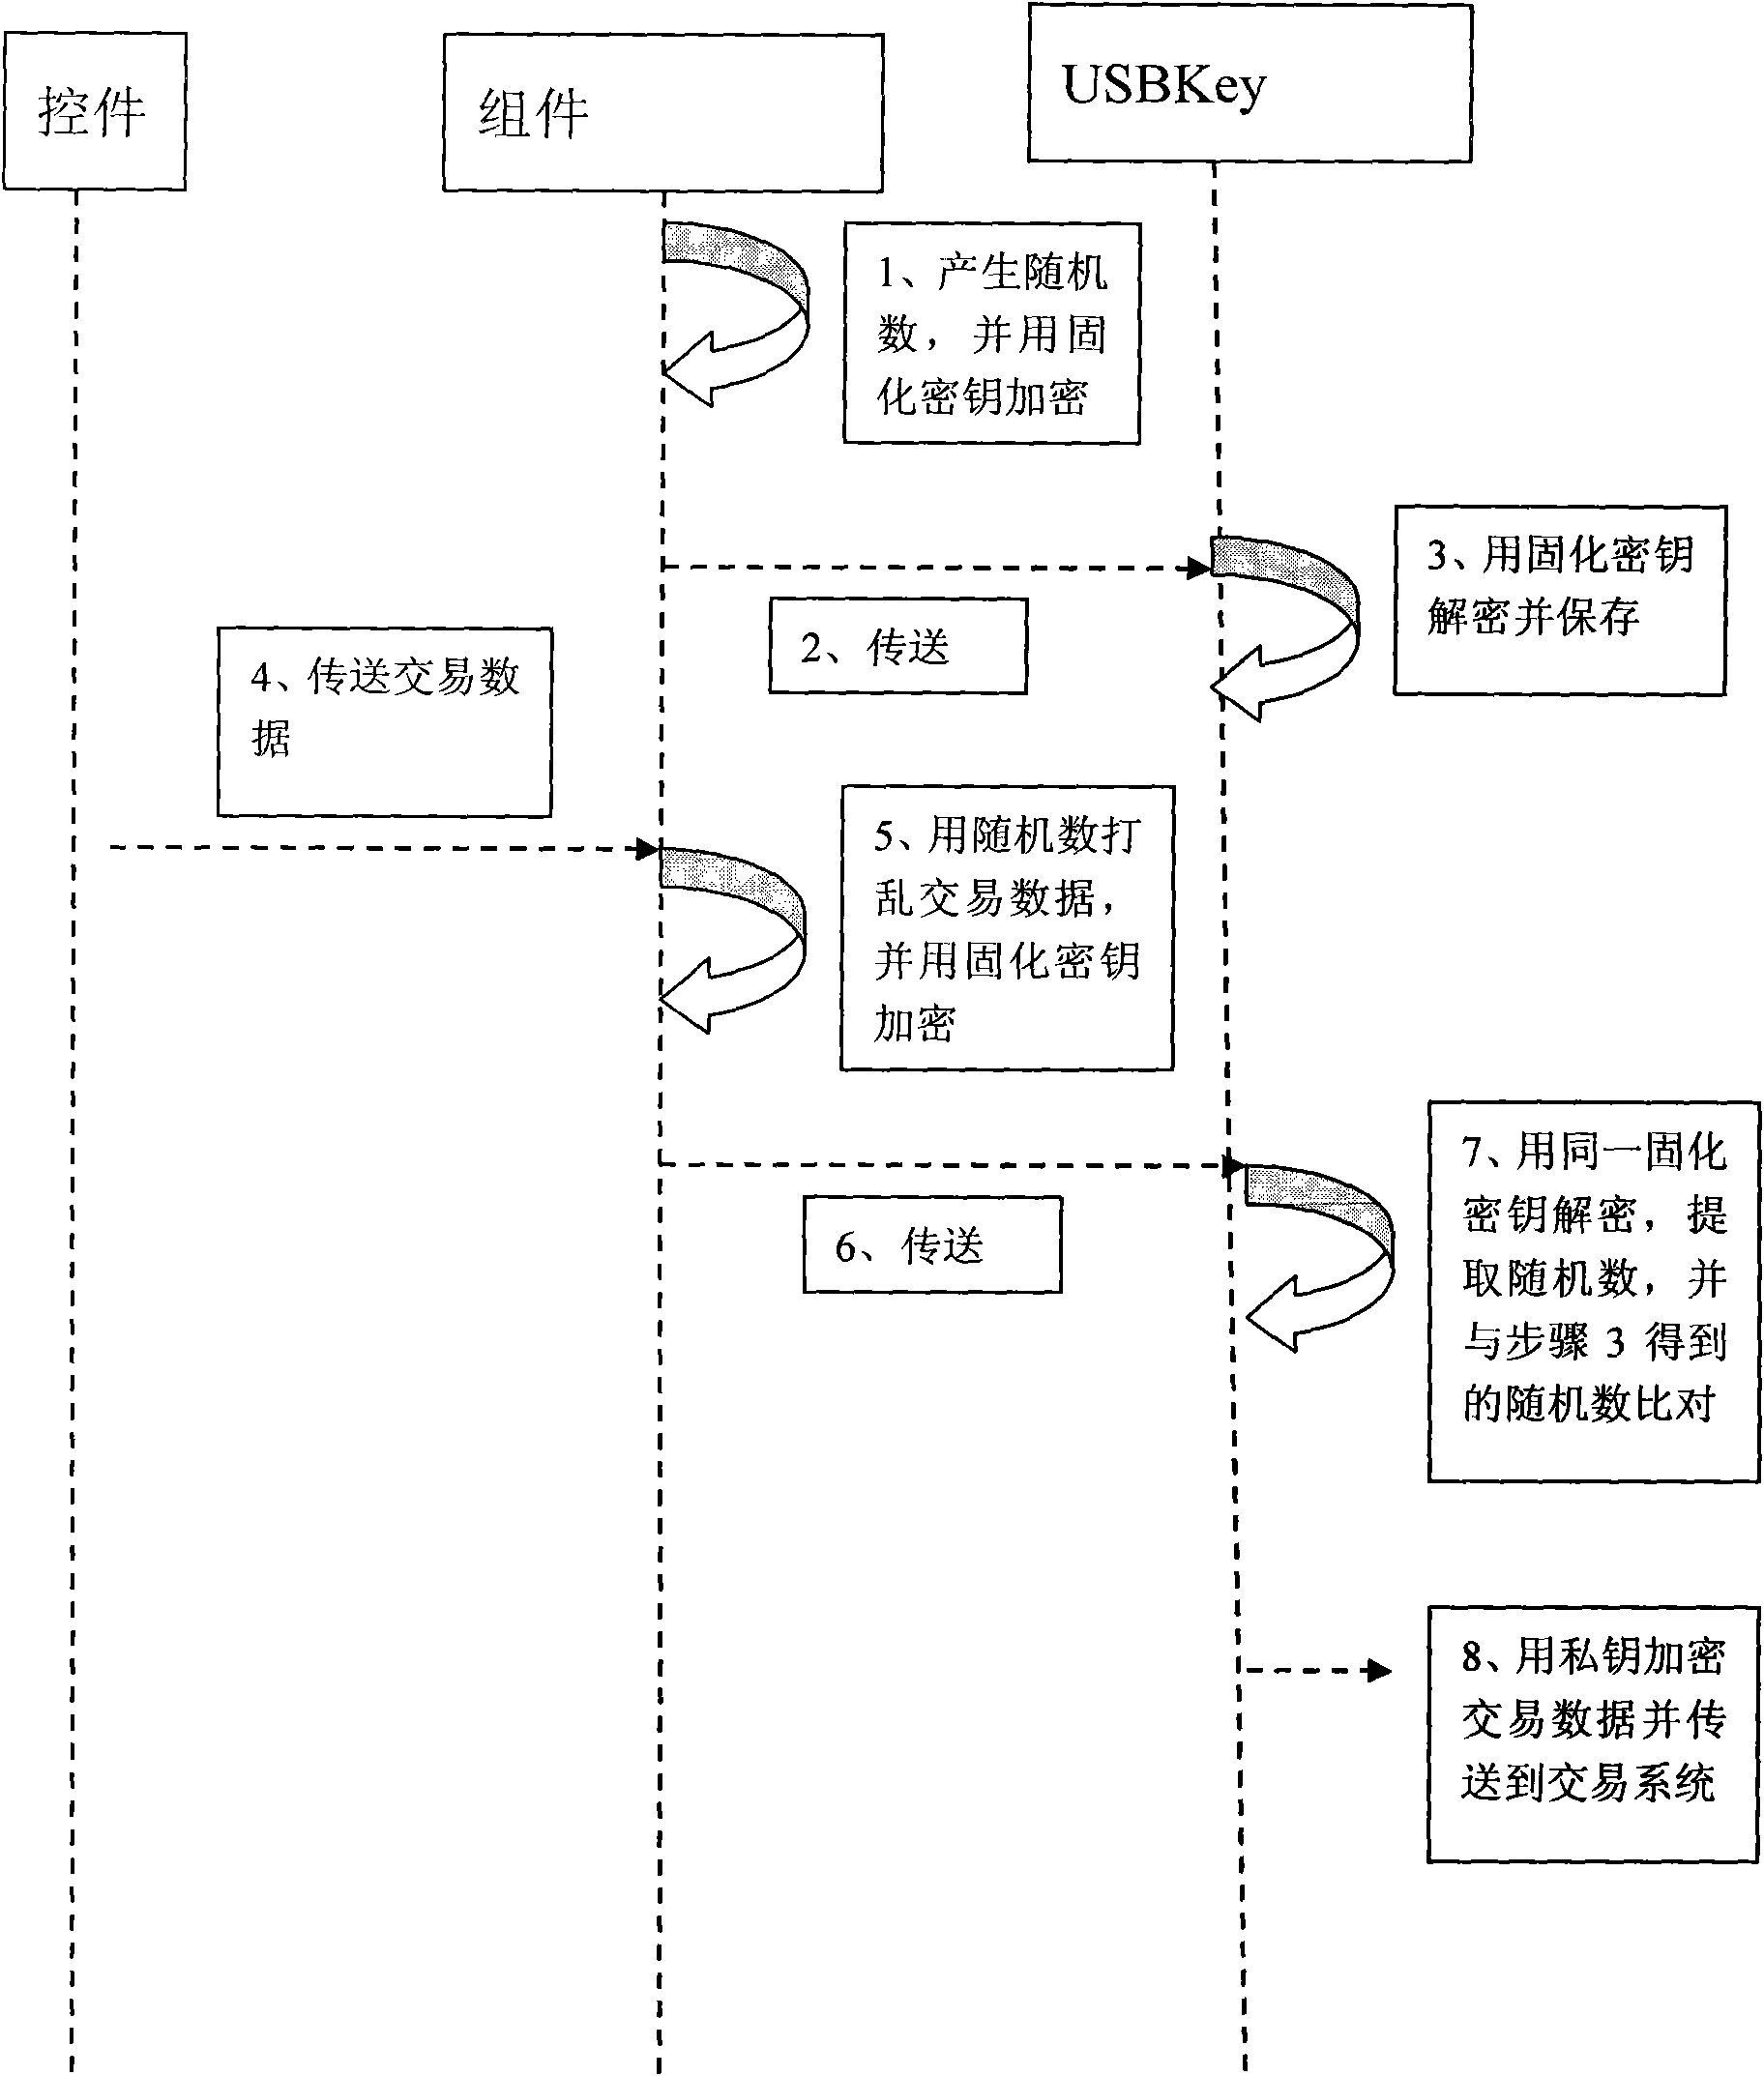 Method and system based on USBKey online banking trade information authentication